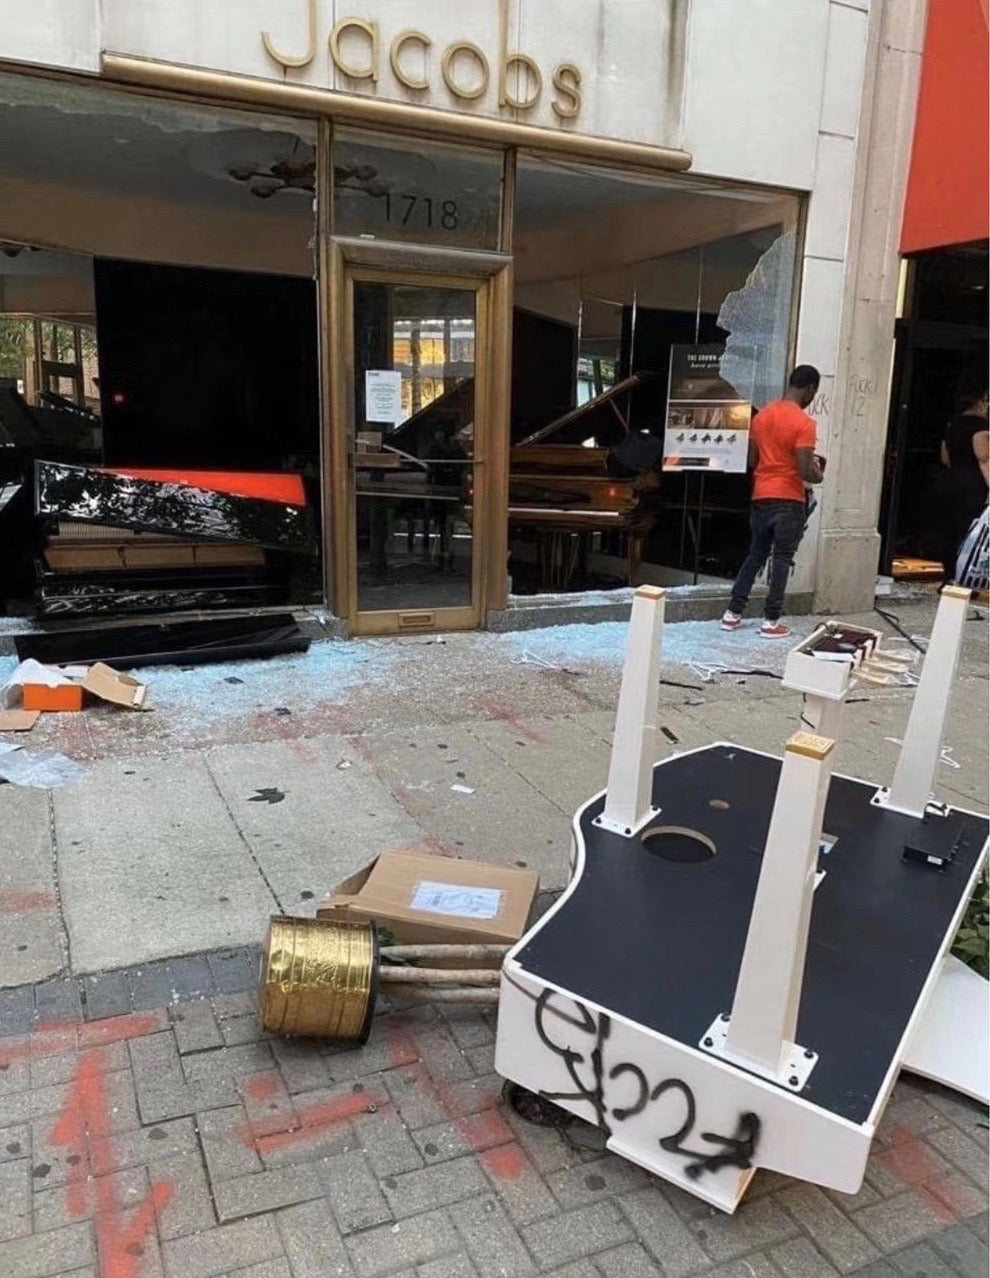 Steinway Store and New Steinway Pianos Damaged in Philly Riots (VIDEO)